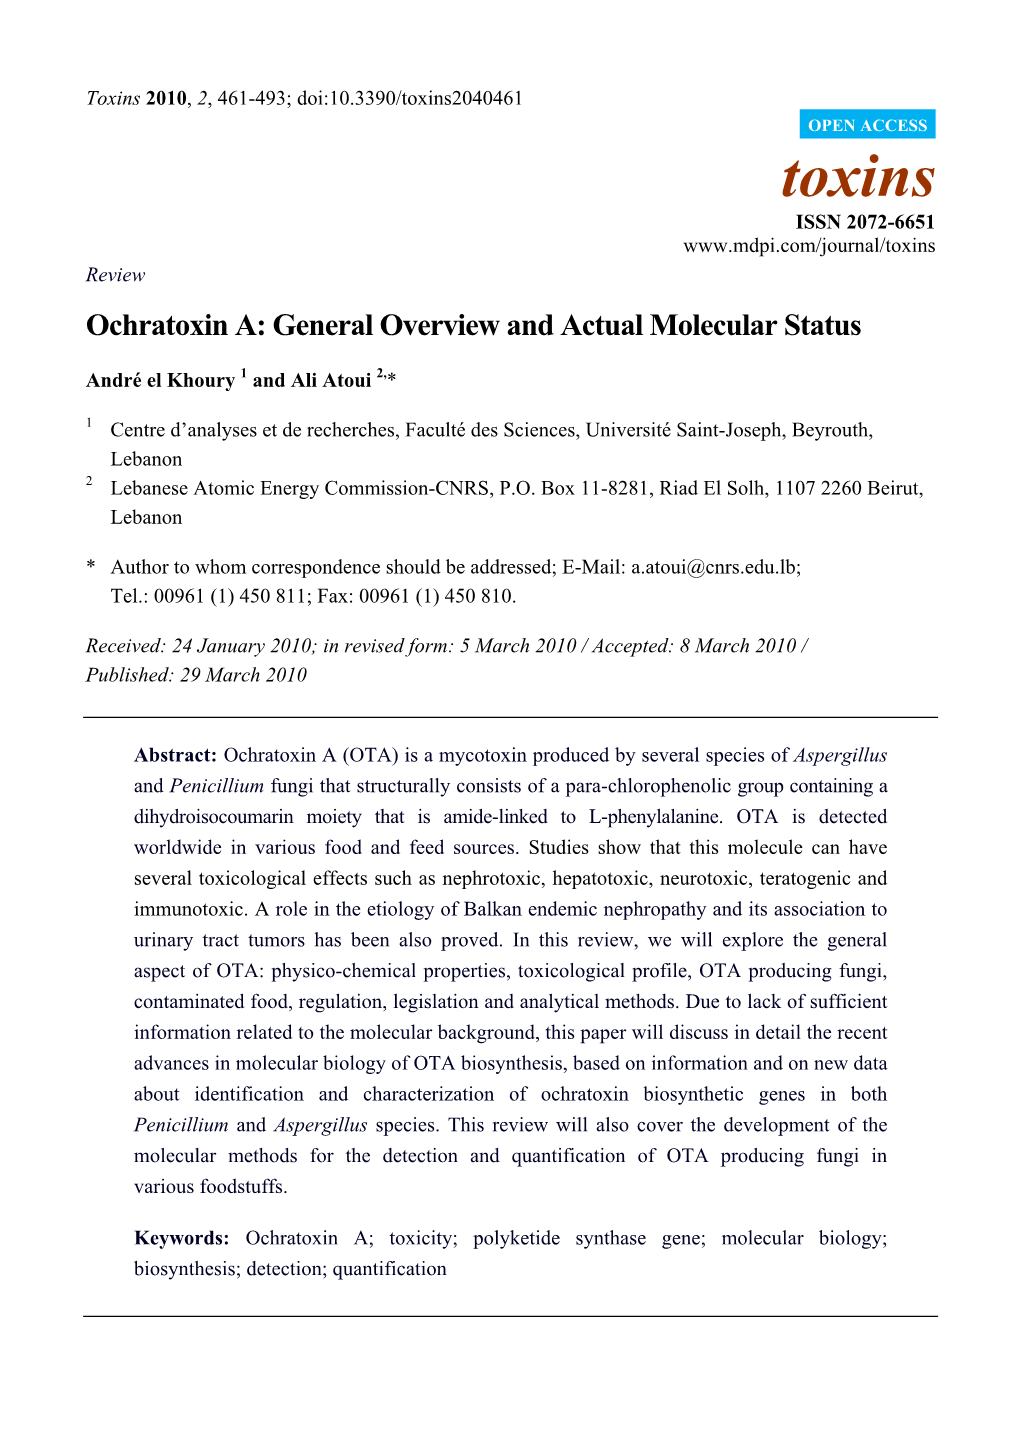 Ochratoxin A: General Overview and Actual Molecular Status